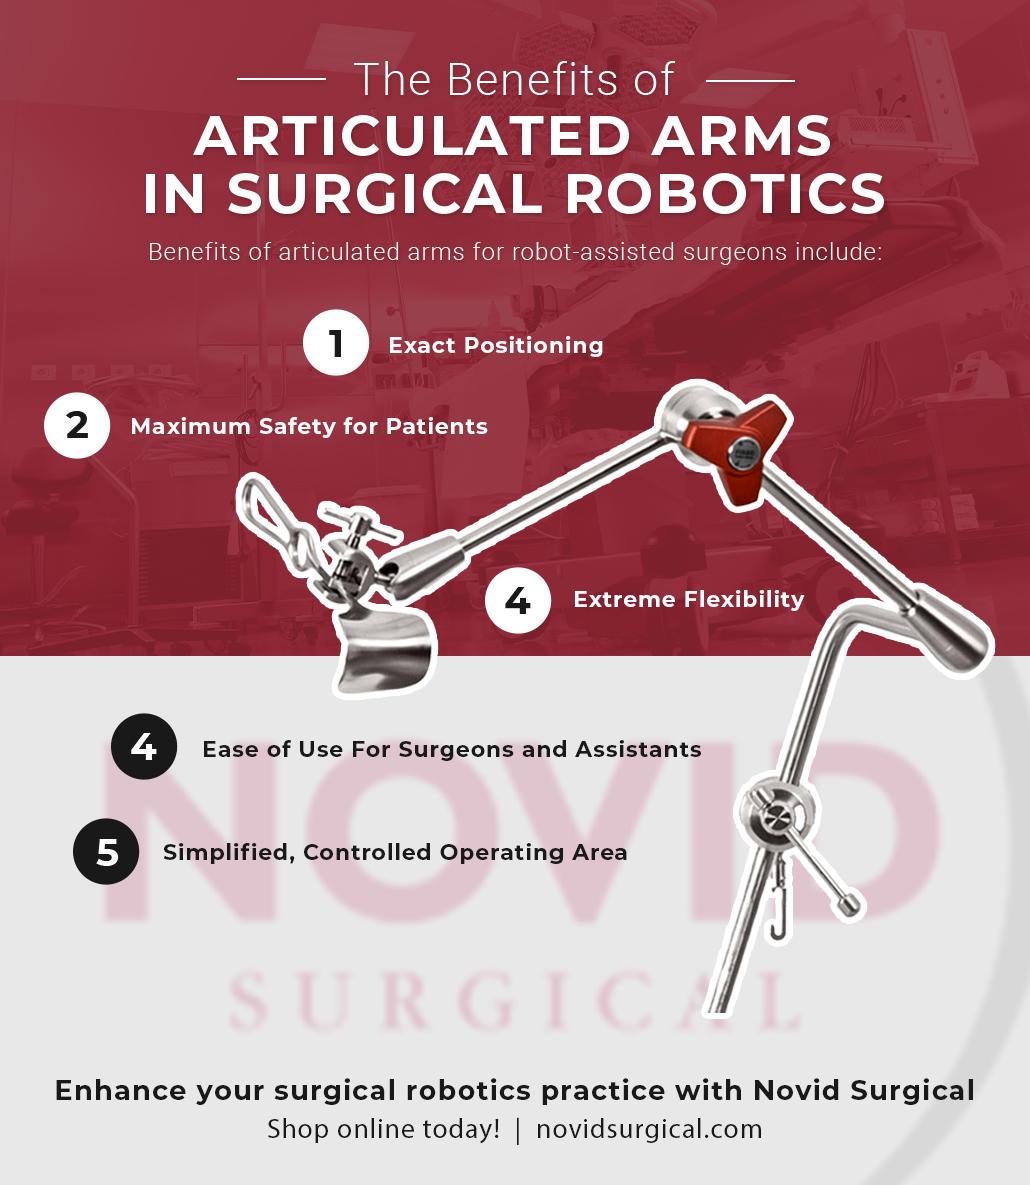 Benefits of Articulated Arm Surgical Robotics